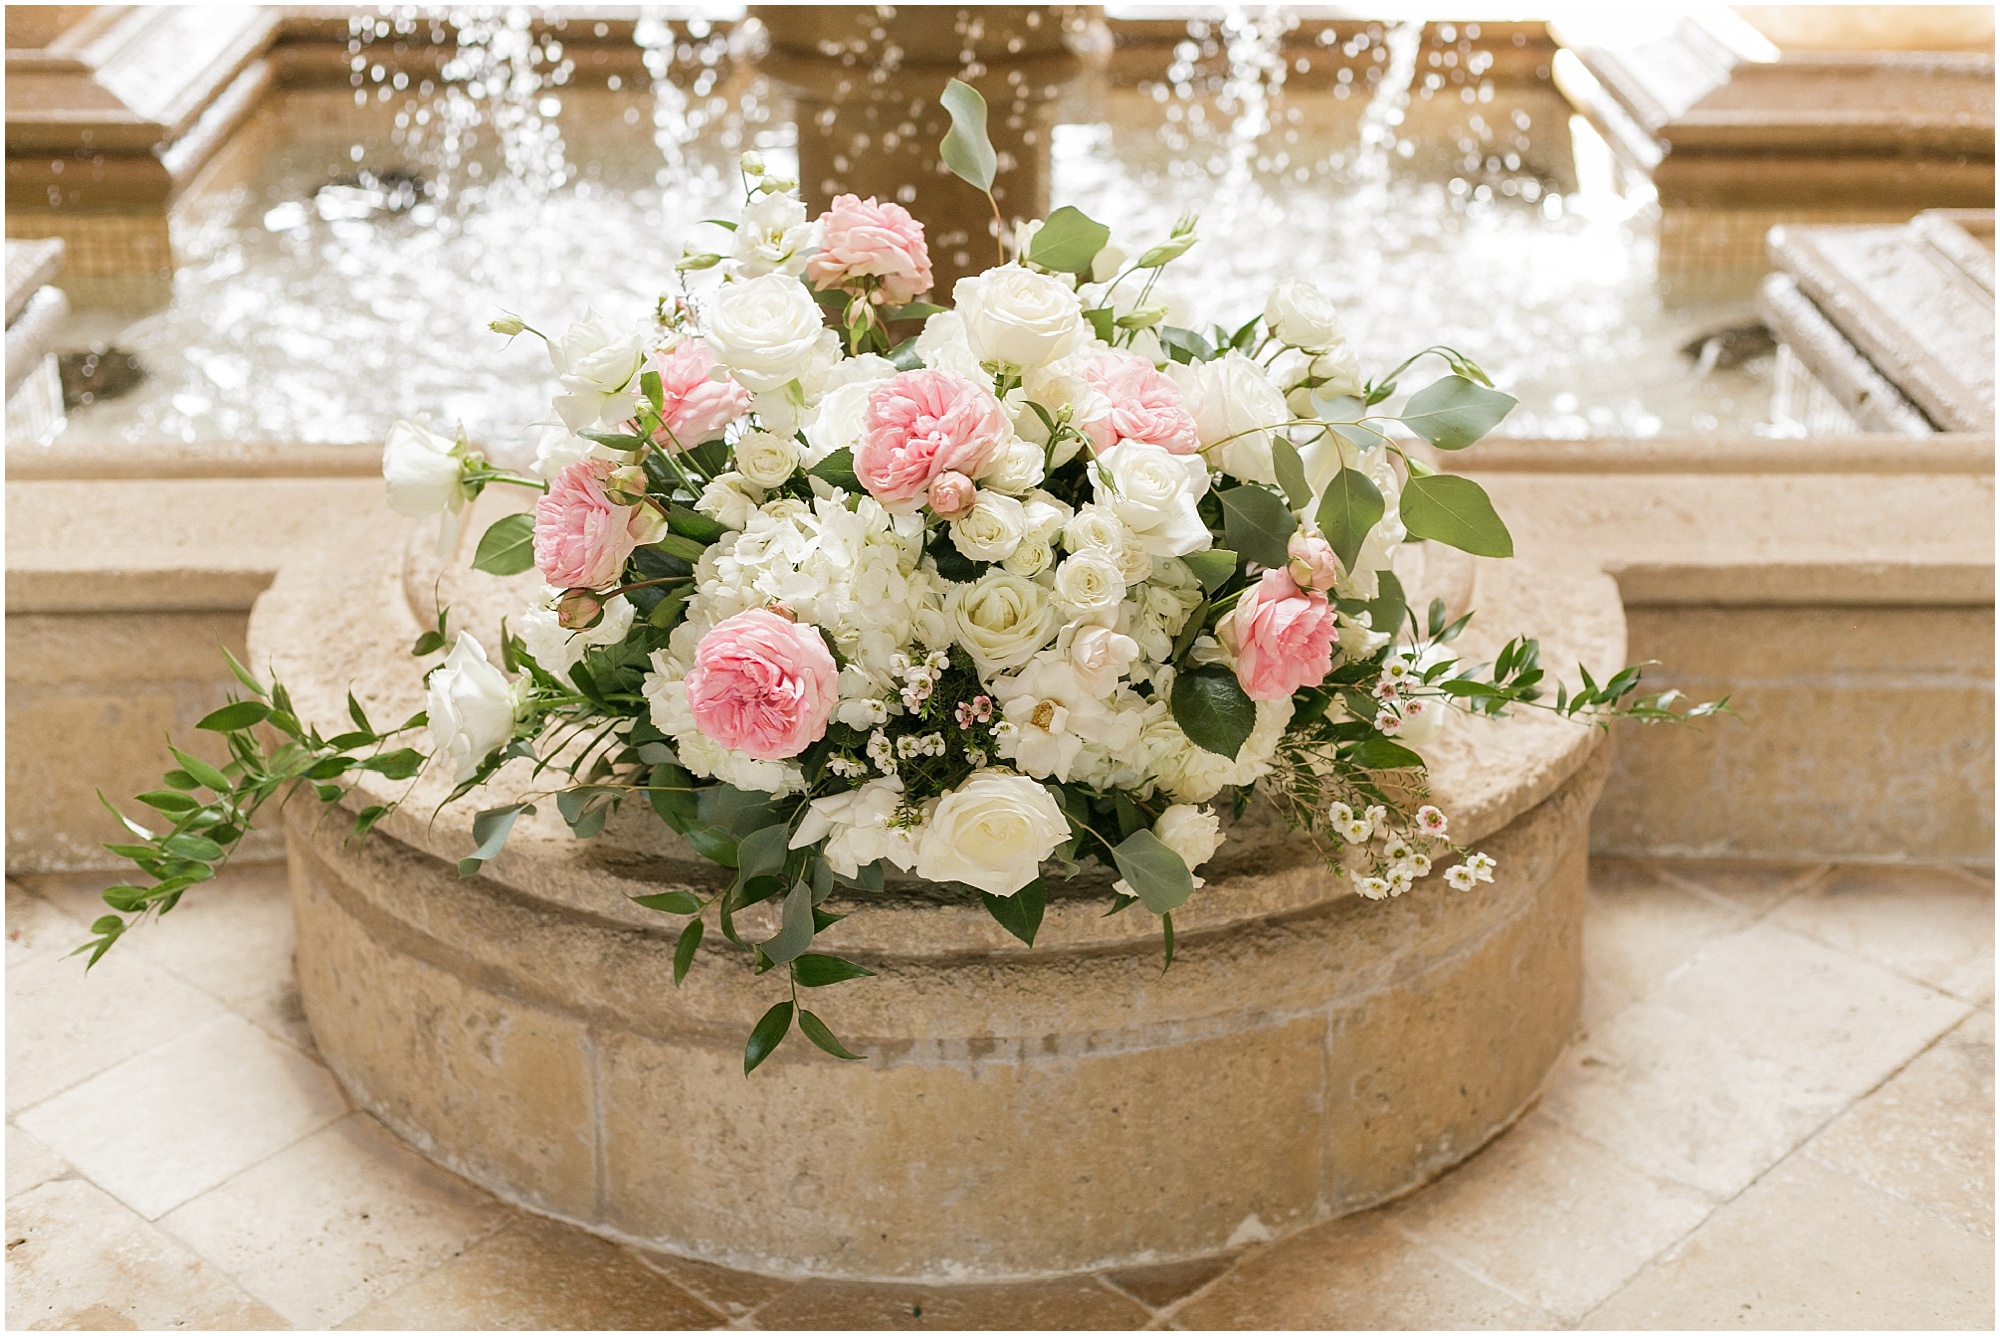 Intimate Italian pink and white wedding flowers